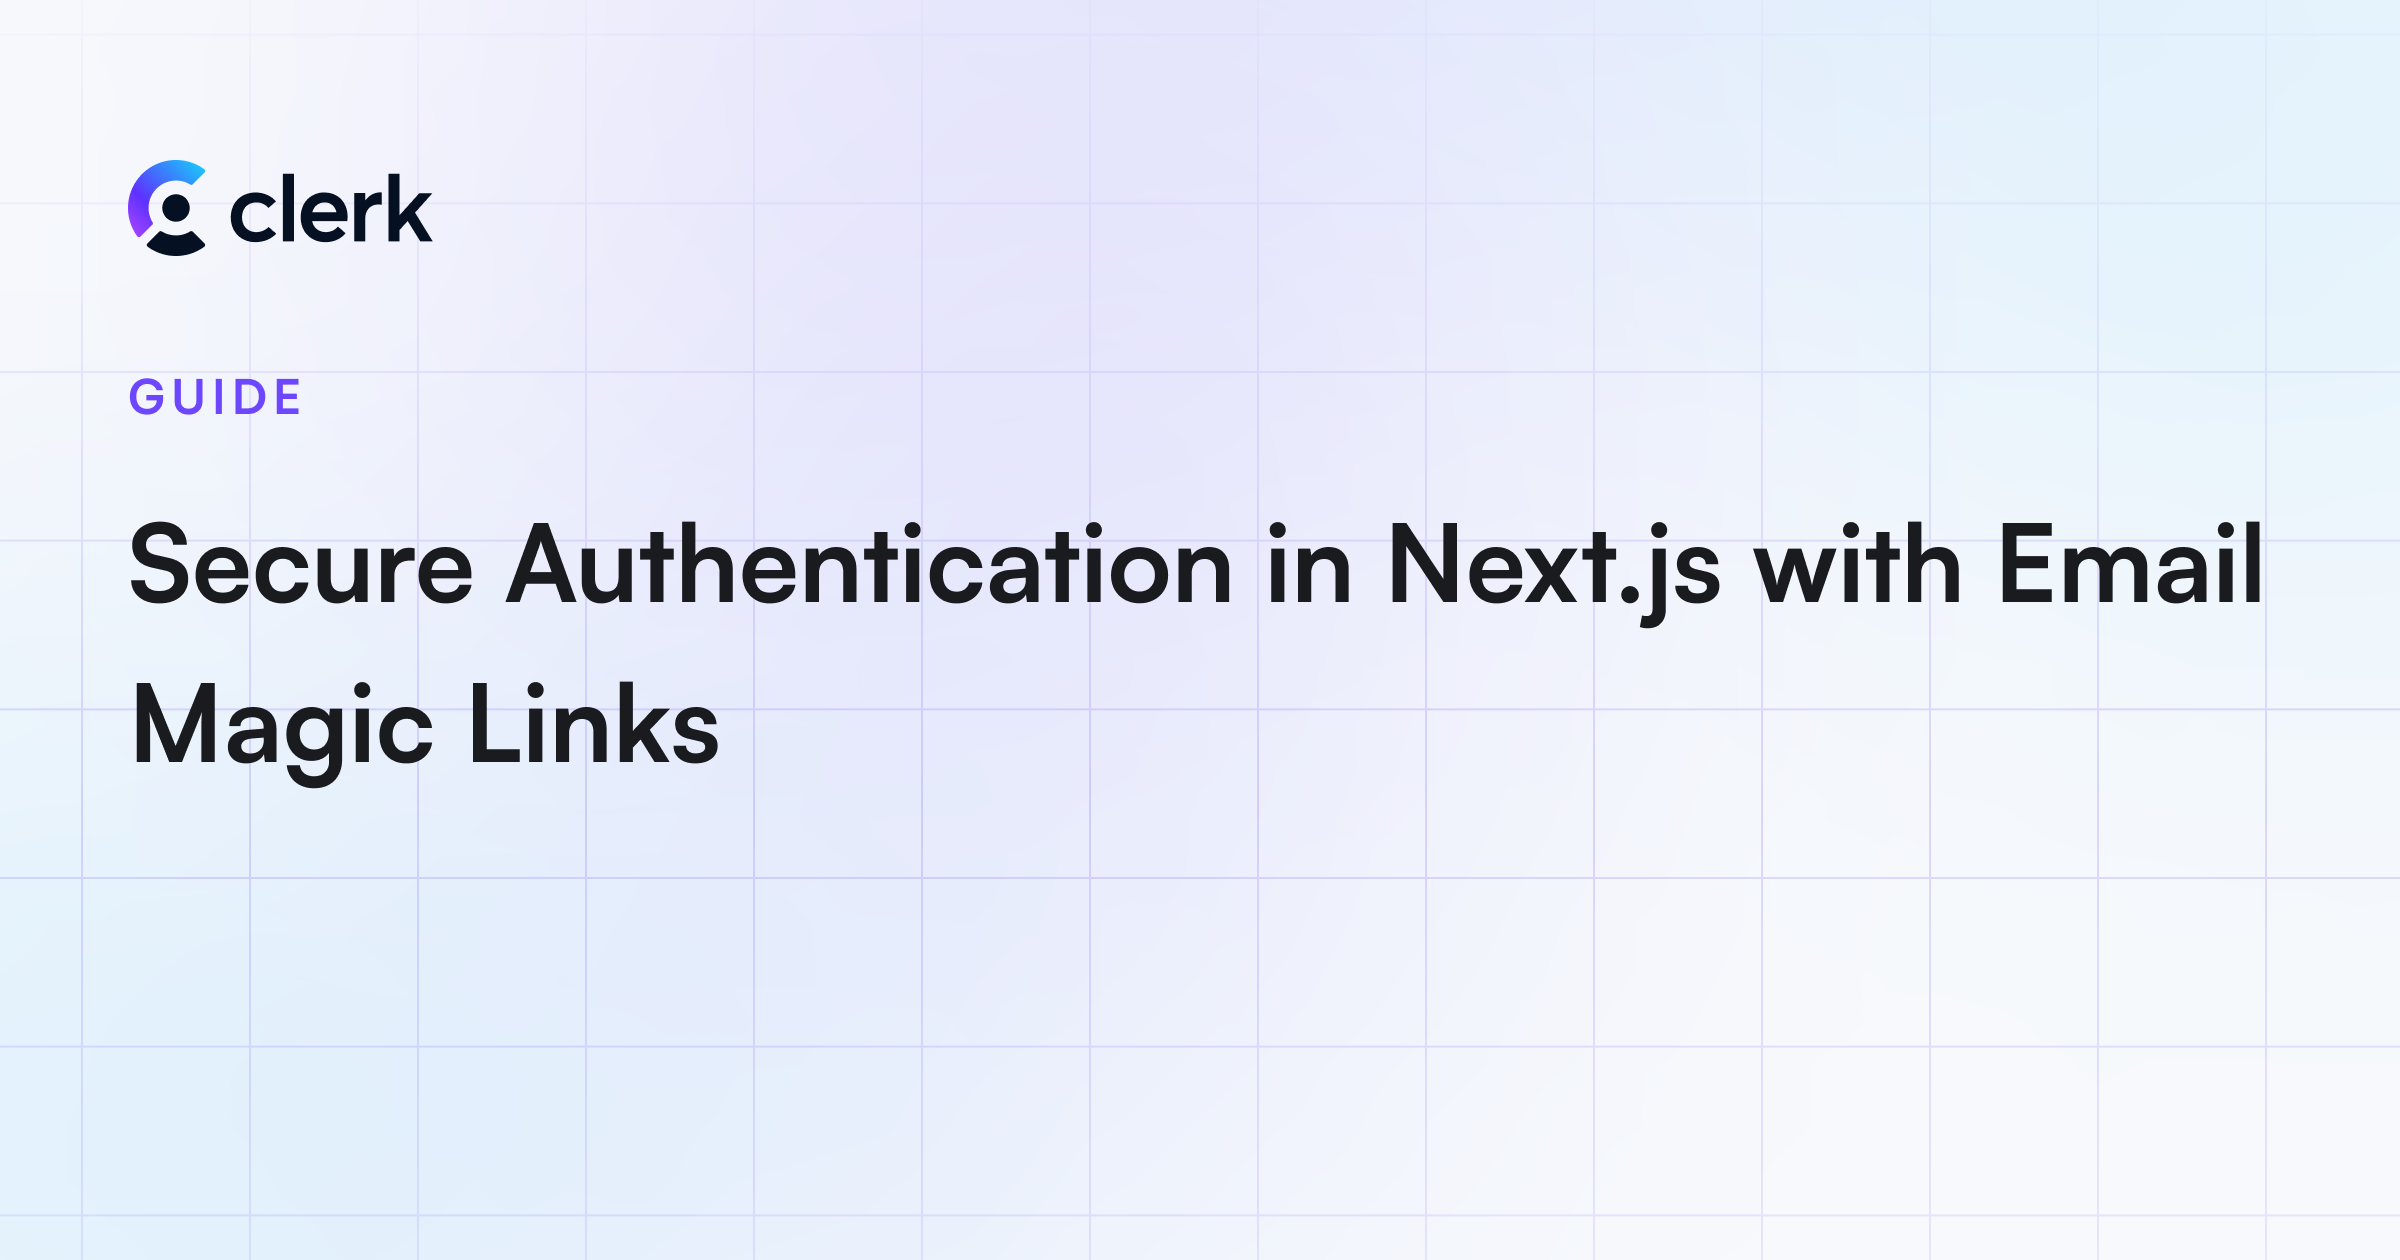 Secure Authentication in Next.js with Email Magic Links